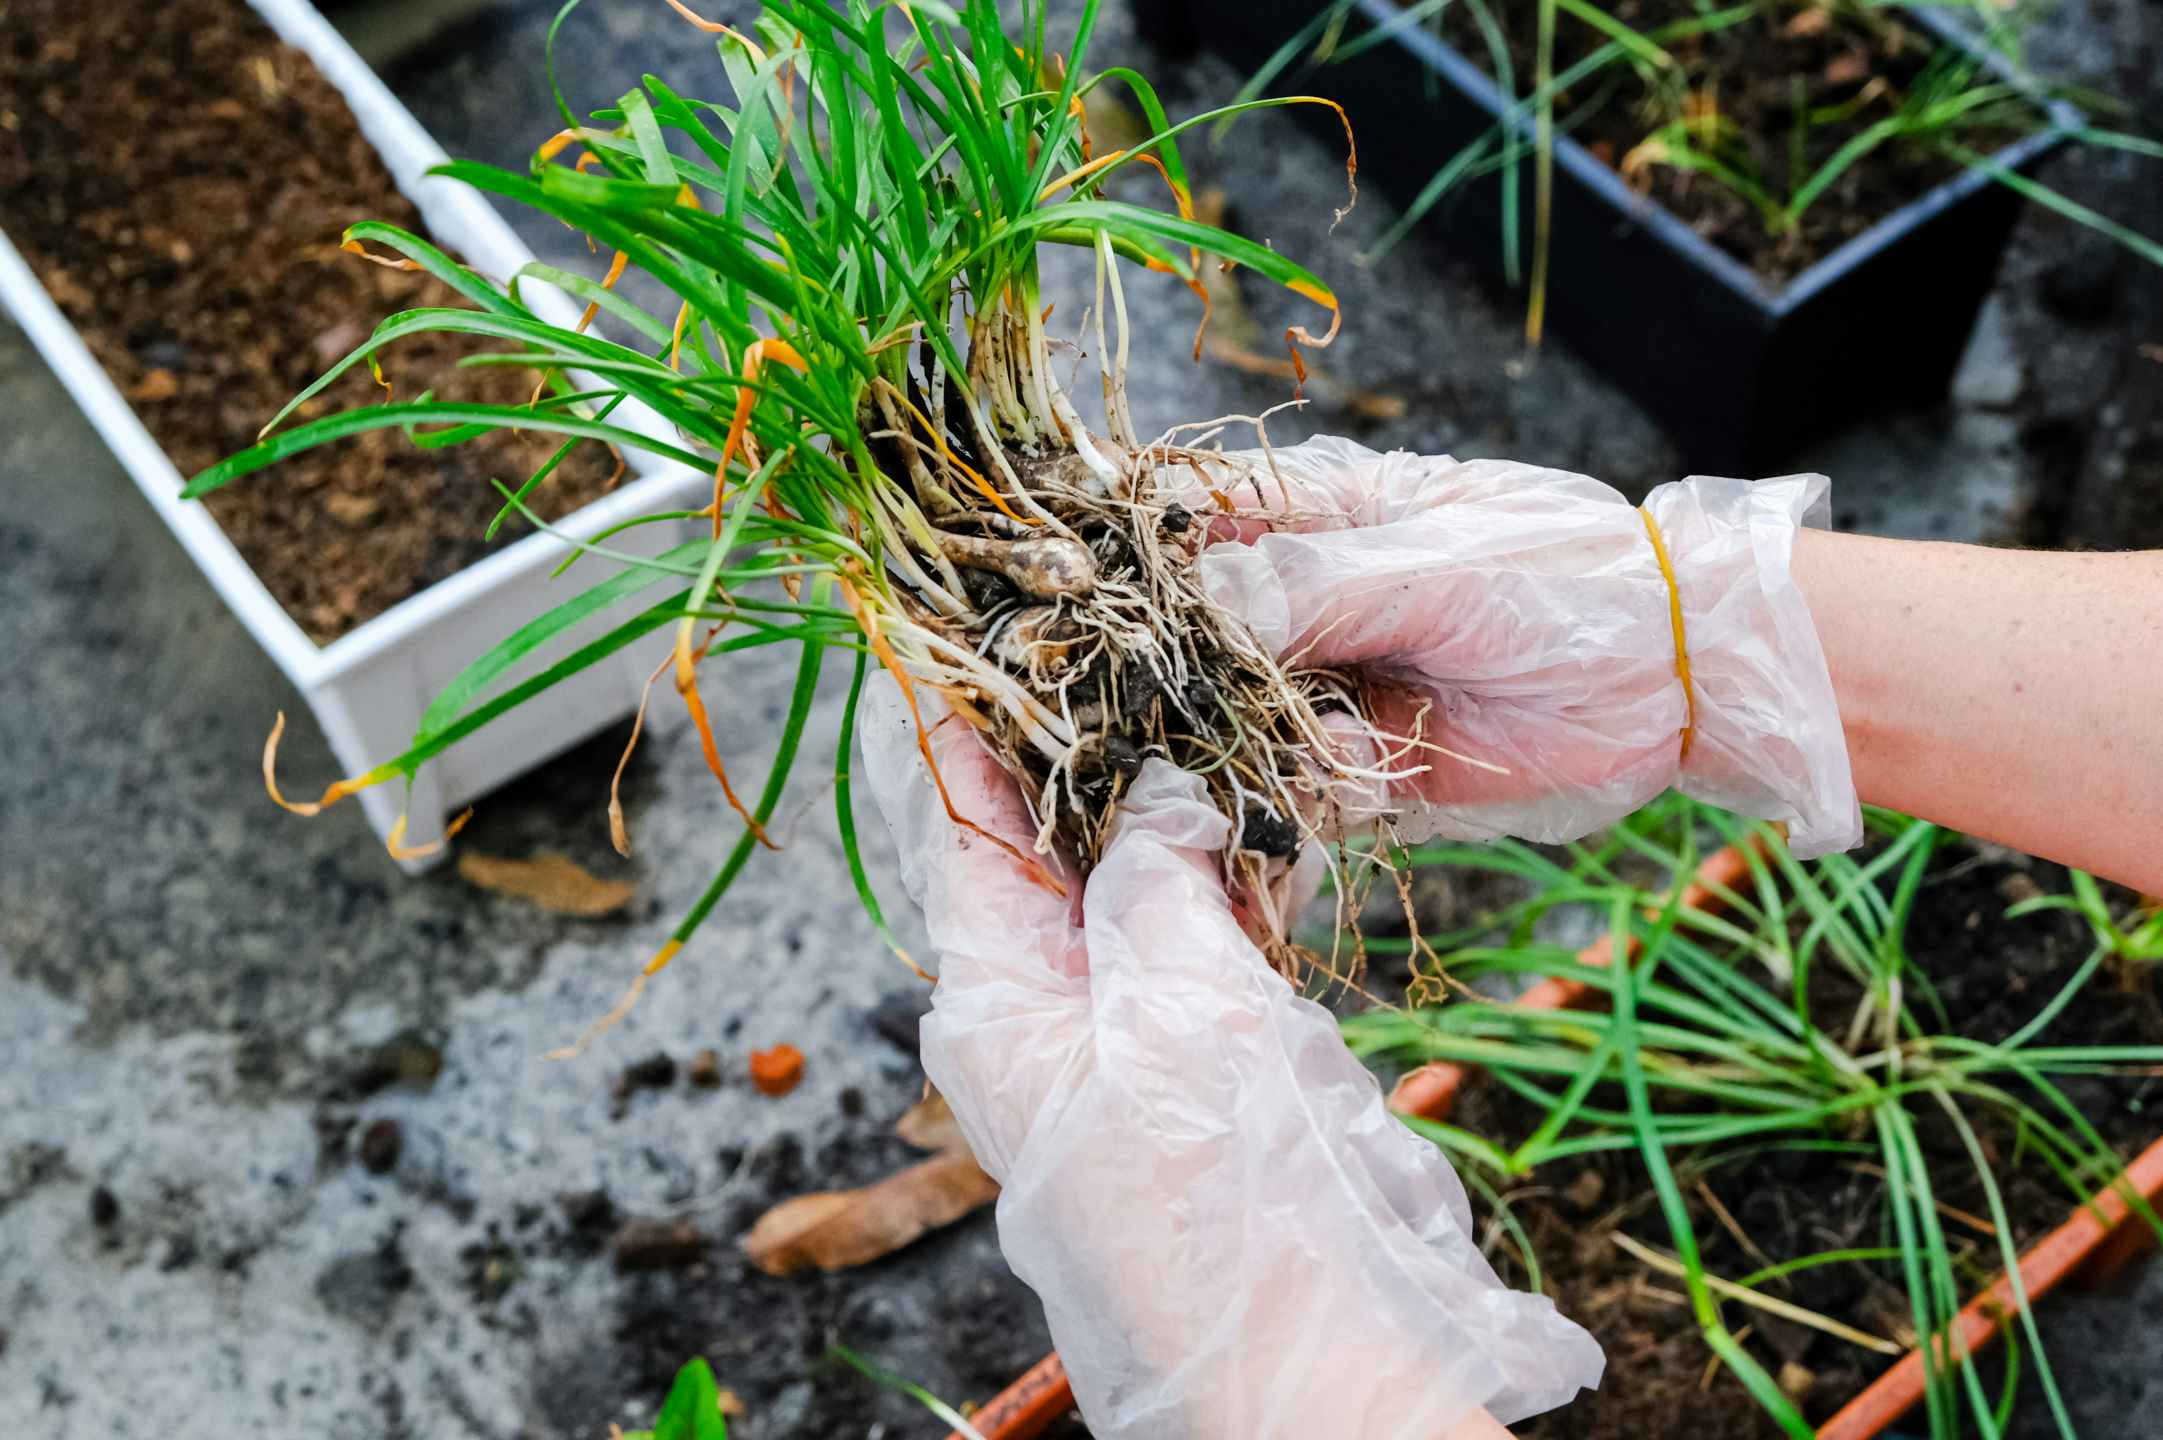 A person's gloved hands separating a plant's roots.